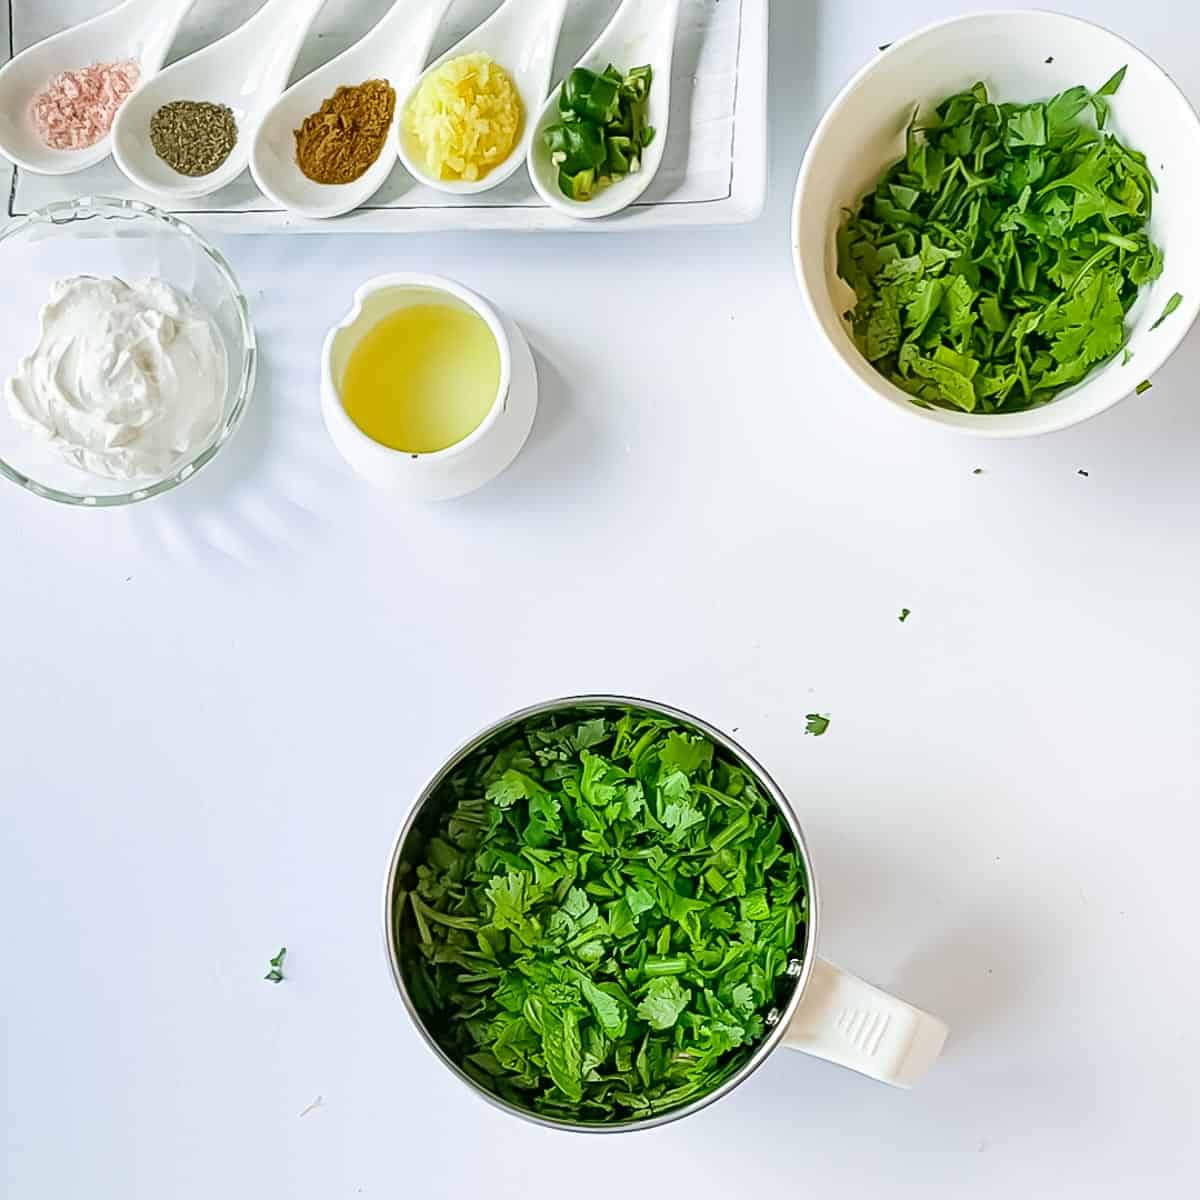 Chopped ingredients for Indian mint sauce recipe in separate bowls.